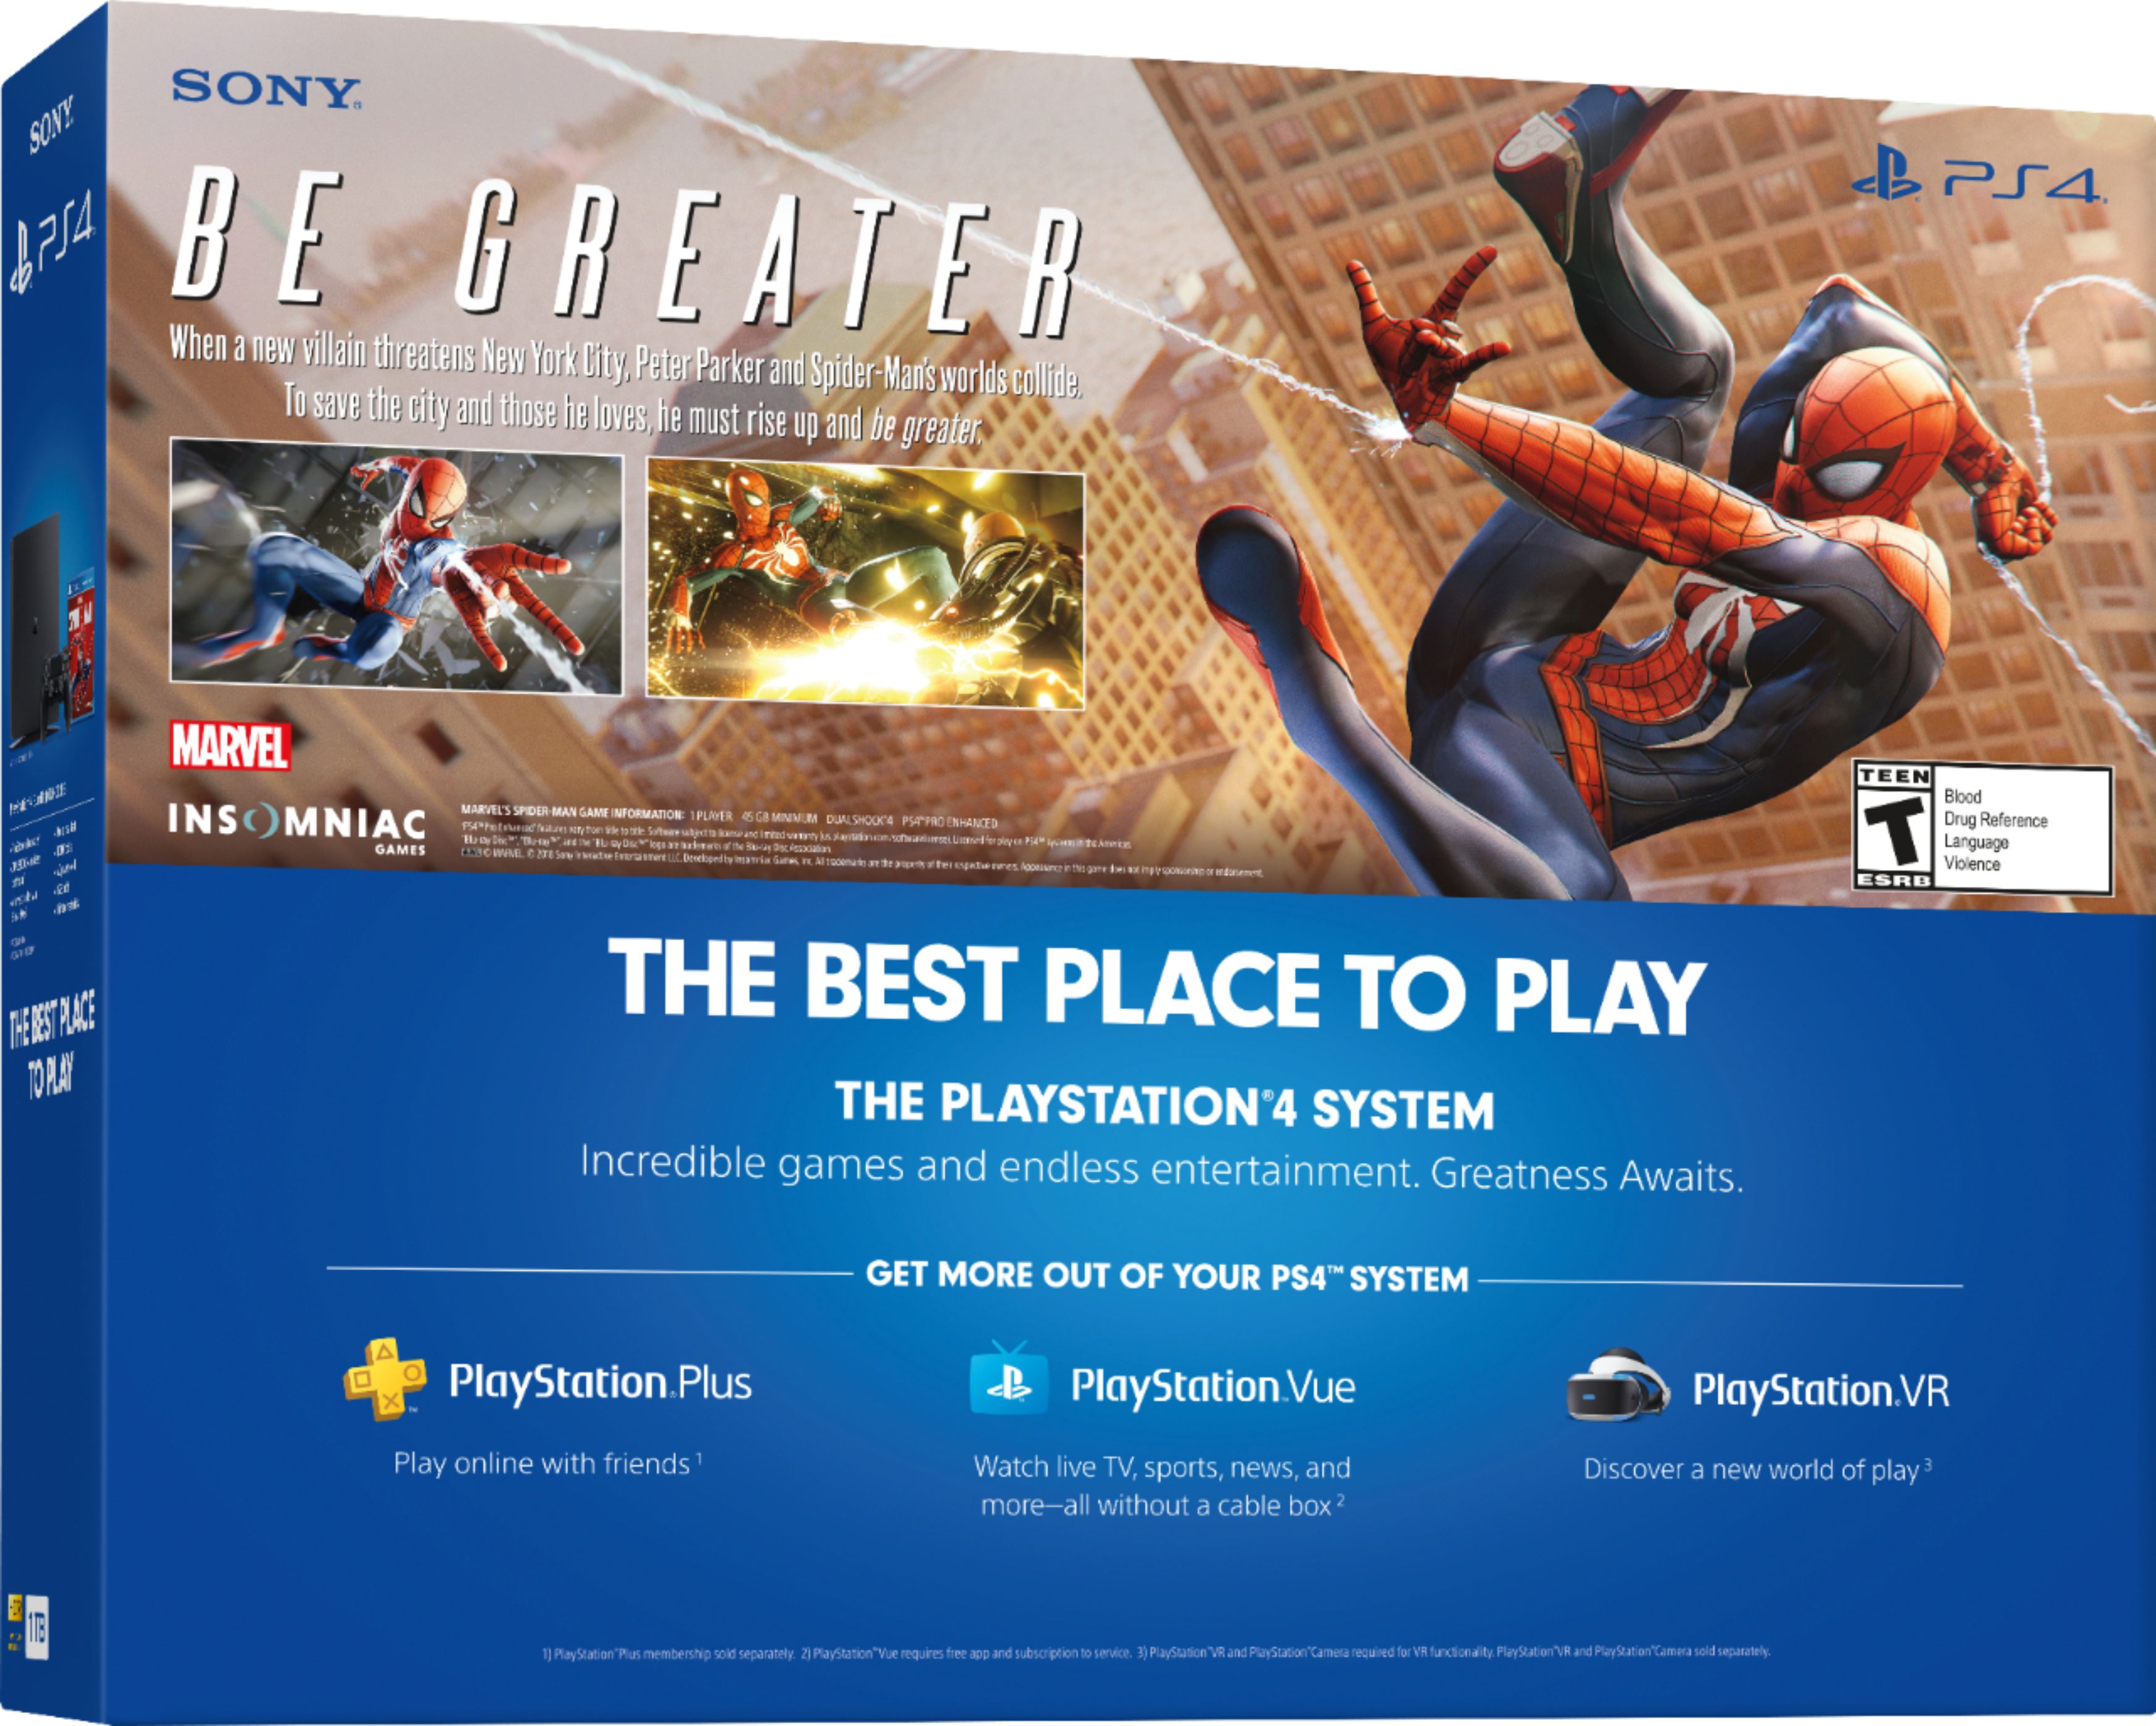 PS4 The Amazing Spider-Man 2 Sony PlayStation 4 Marvel w/tracking